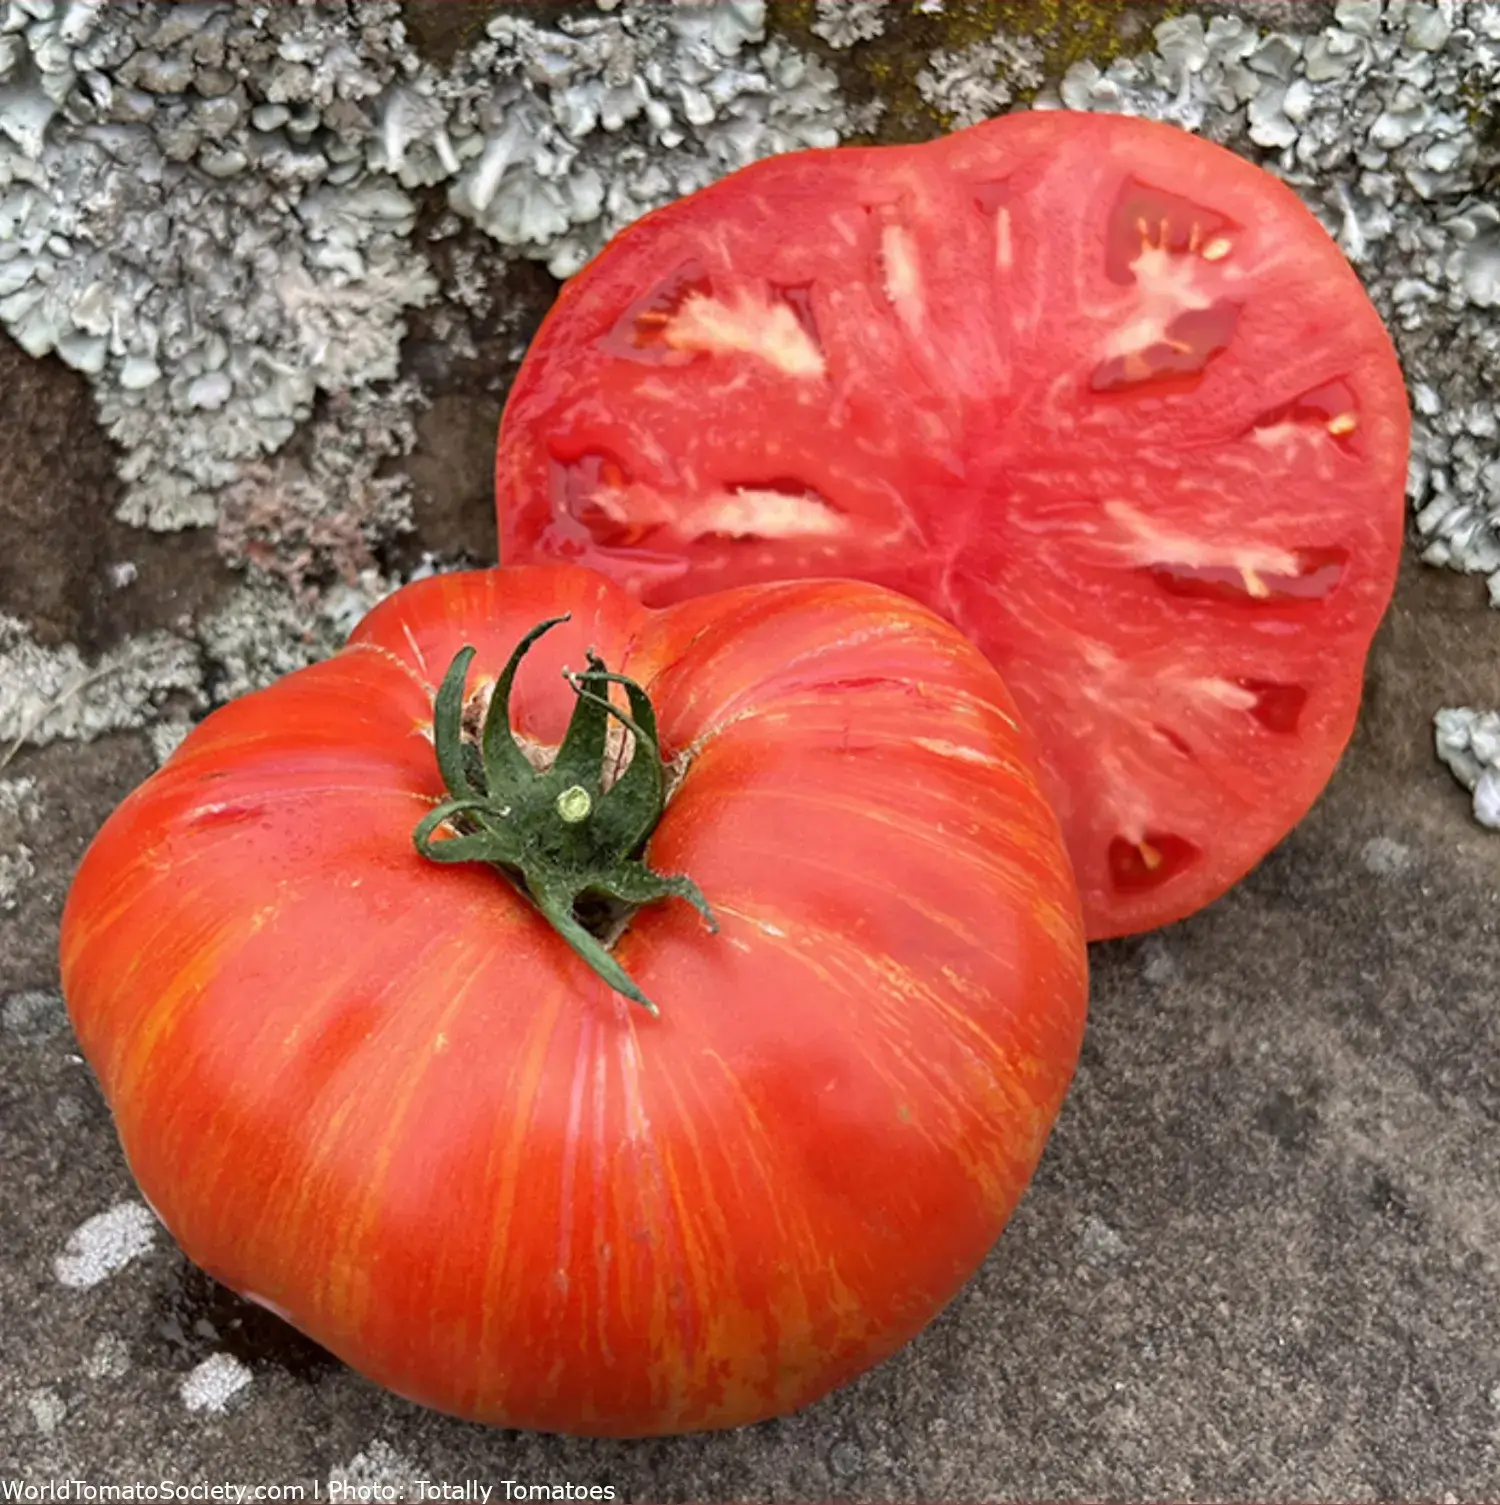 Red Striped Tomato Cream of the Crop™ - Beefy Red